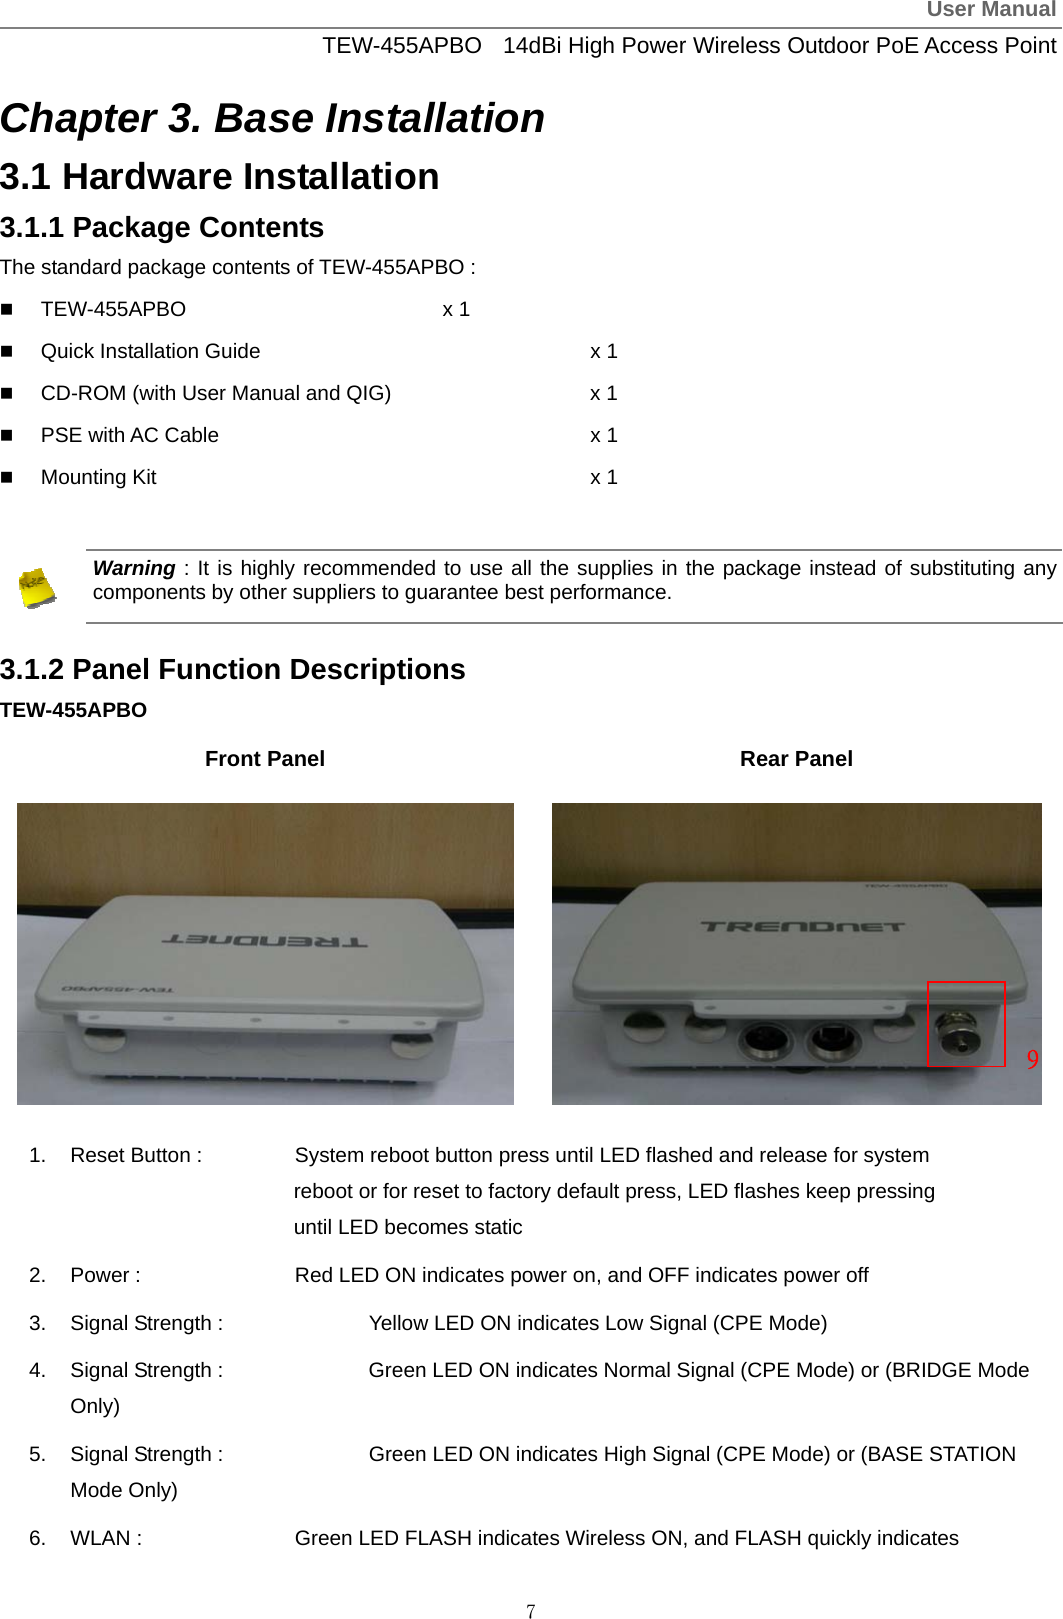 User ManualTEW-455APBO  14dBi High Power Wireless Outdoor PoE Access Point 7 Chapter 3. Base Installation 3.1 Hardware Installation 3.1.1 Package Contents The standard package contents of TEW-455APBO :  TEW-455APBO    x 1  Quick Installation Guide     x 1  CD-ROM (with User Manual and QIG)      x 1  PSE with AC Cable      x 1  Mounting Kit      x 1   Warning : It is highly recommended to use all the supplies in the package instead of substituting any components by other suppliers to guarantee best performance.  3.1.2 Panel Function Descriptions TEW-455APBO Front Panel  Rear Panel  1.  Reset Button :    System reboot button press until LED flashed and release for system                        reboot or for reset to factory default press, LED flashes keep pressing                 until LED becomes static 2.  Power :     Red LED ON indicates power on, and OFF indicates power off 3.  Signal Strength :    Yellow LED ON indicates Low Signal (CPE Mode) 4.  Signal Strength :    Green LED ON indicates Normal Signal (CPE Mode) or (BRIDGE Mode Only) 5.  Signal Strength :    Green LED ON indicates High Signal (CPE Mode) or (BASE STATION Mode Only) 6.  WLAN :     Green LED FLASH indicates Wireless ON, and FLASH quickly indicates   9